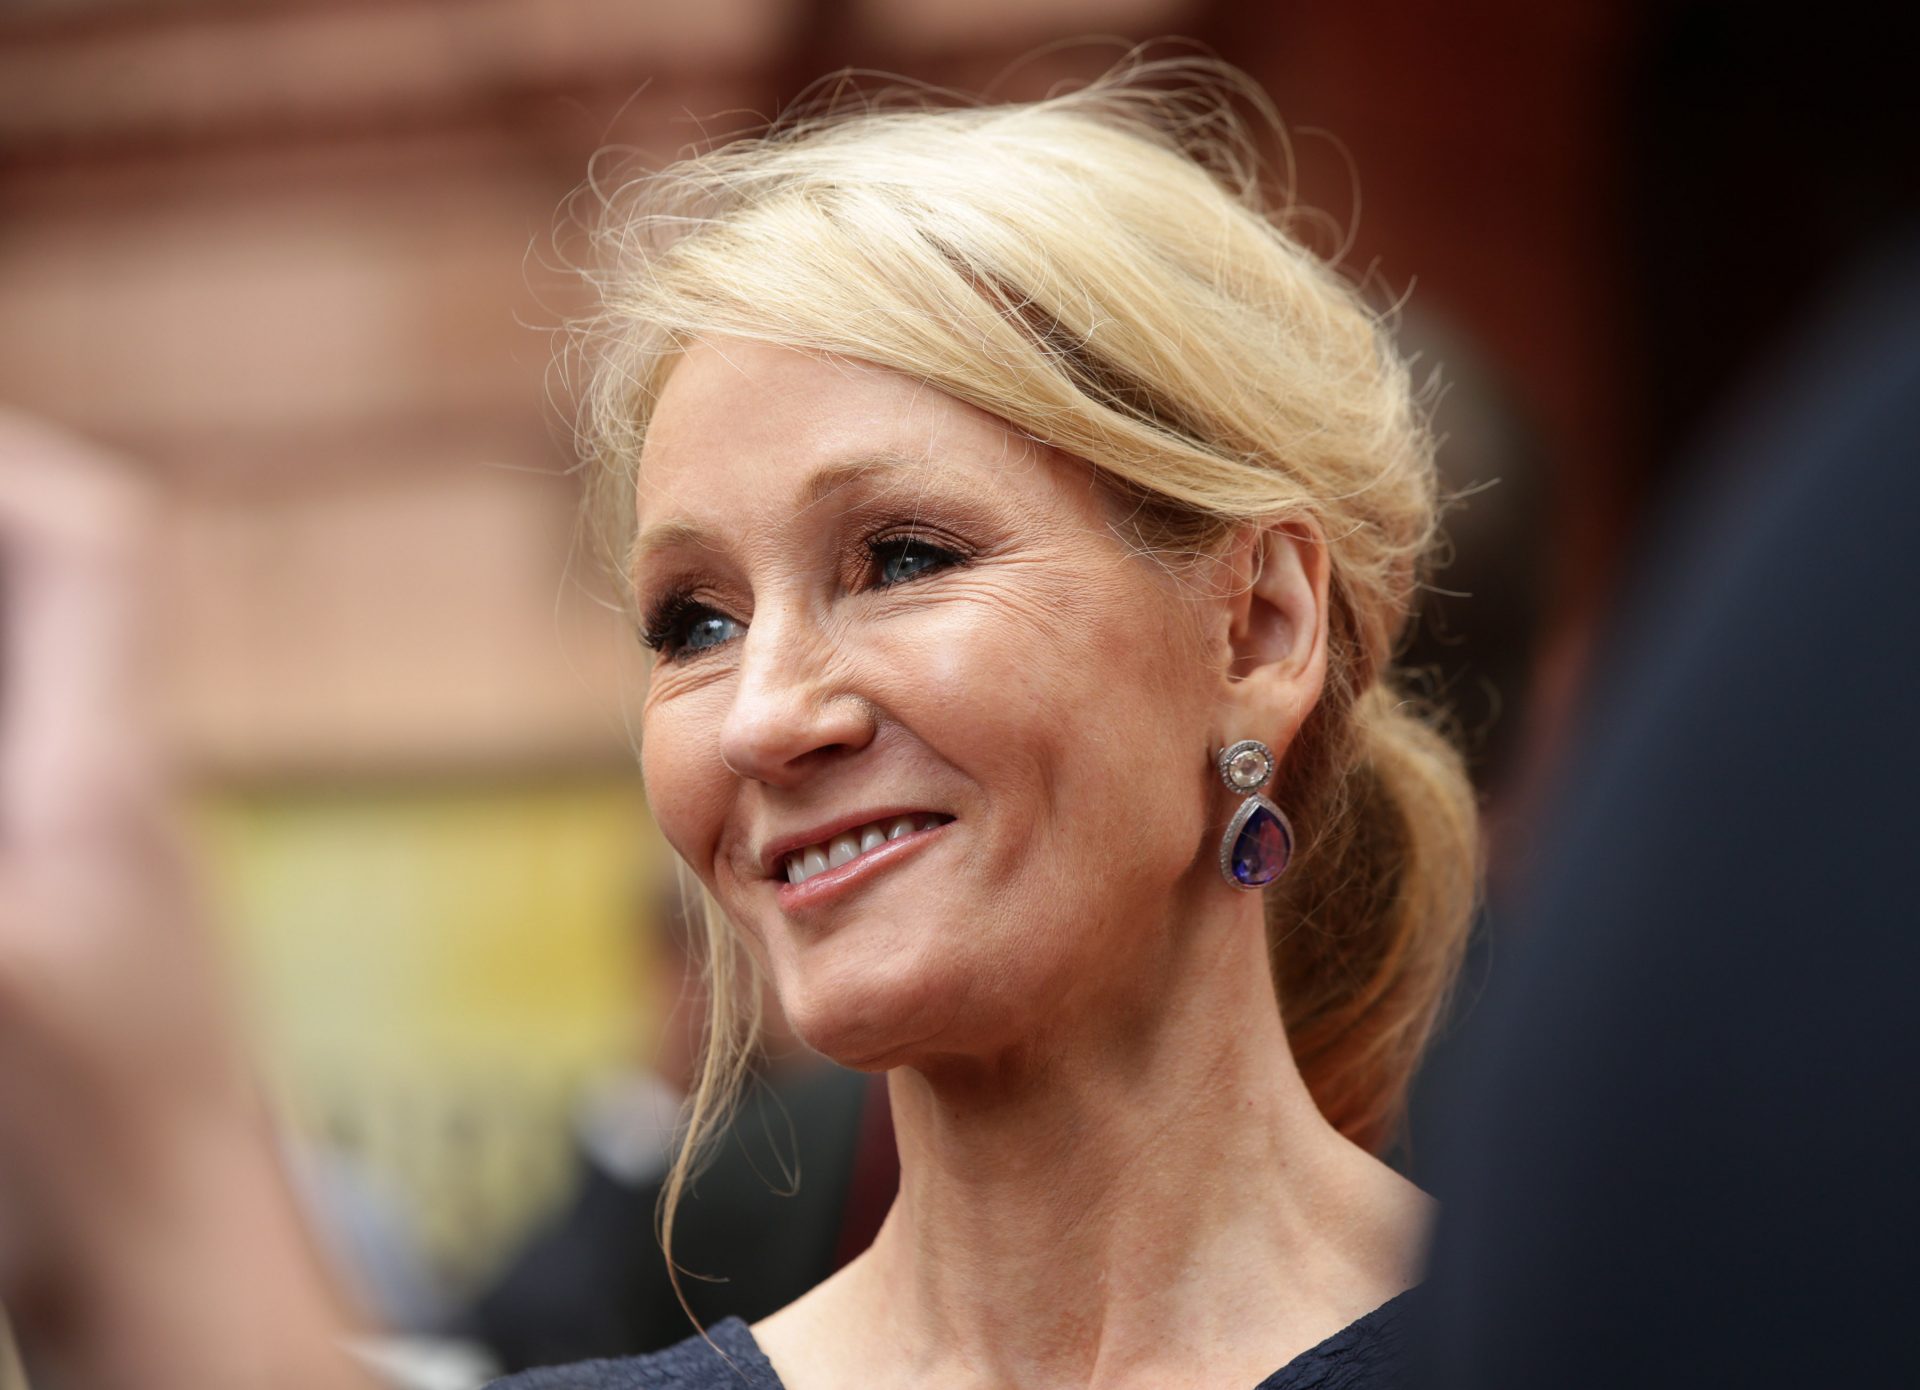 Author JK Rowling was the subject of last week's cover story. Photograph: PA.